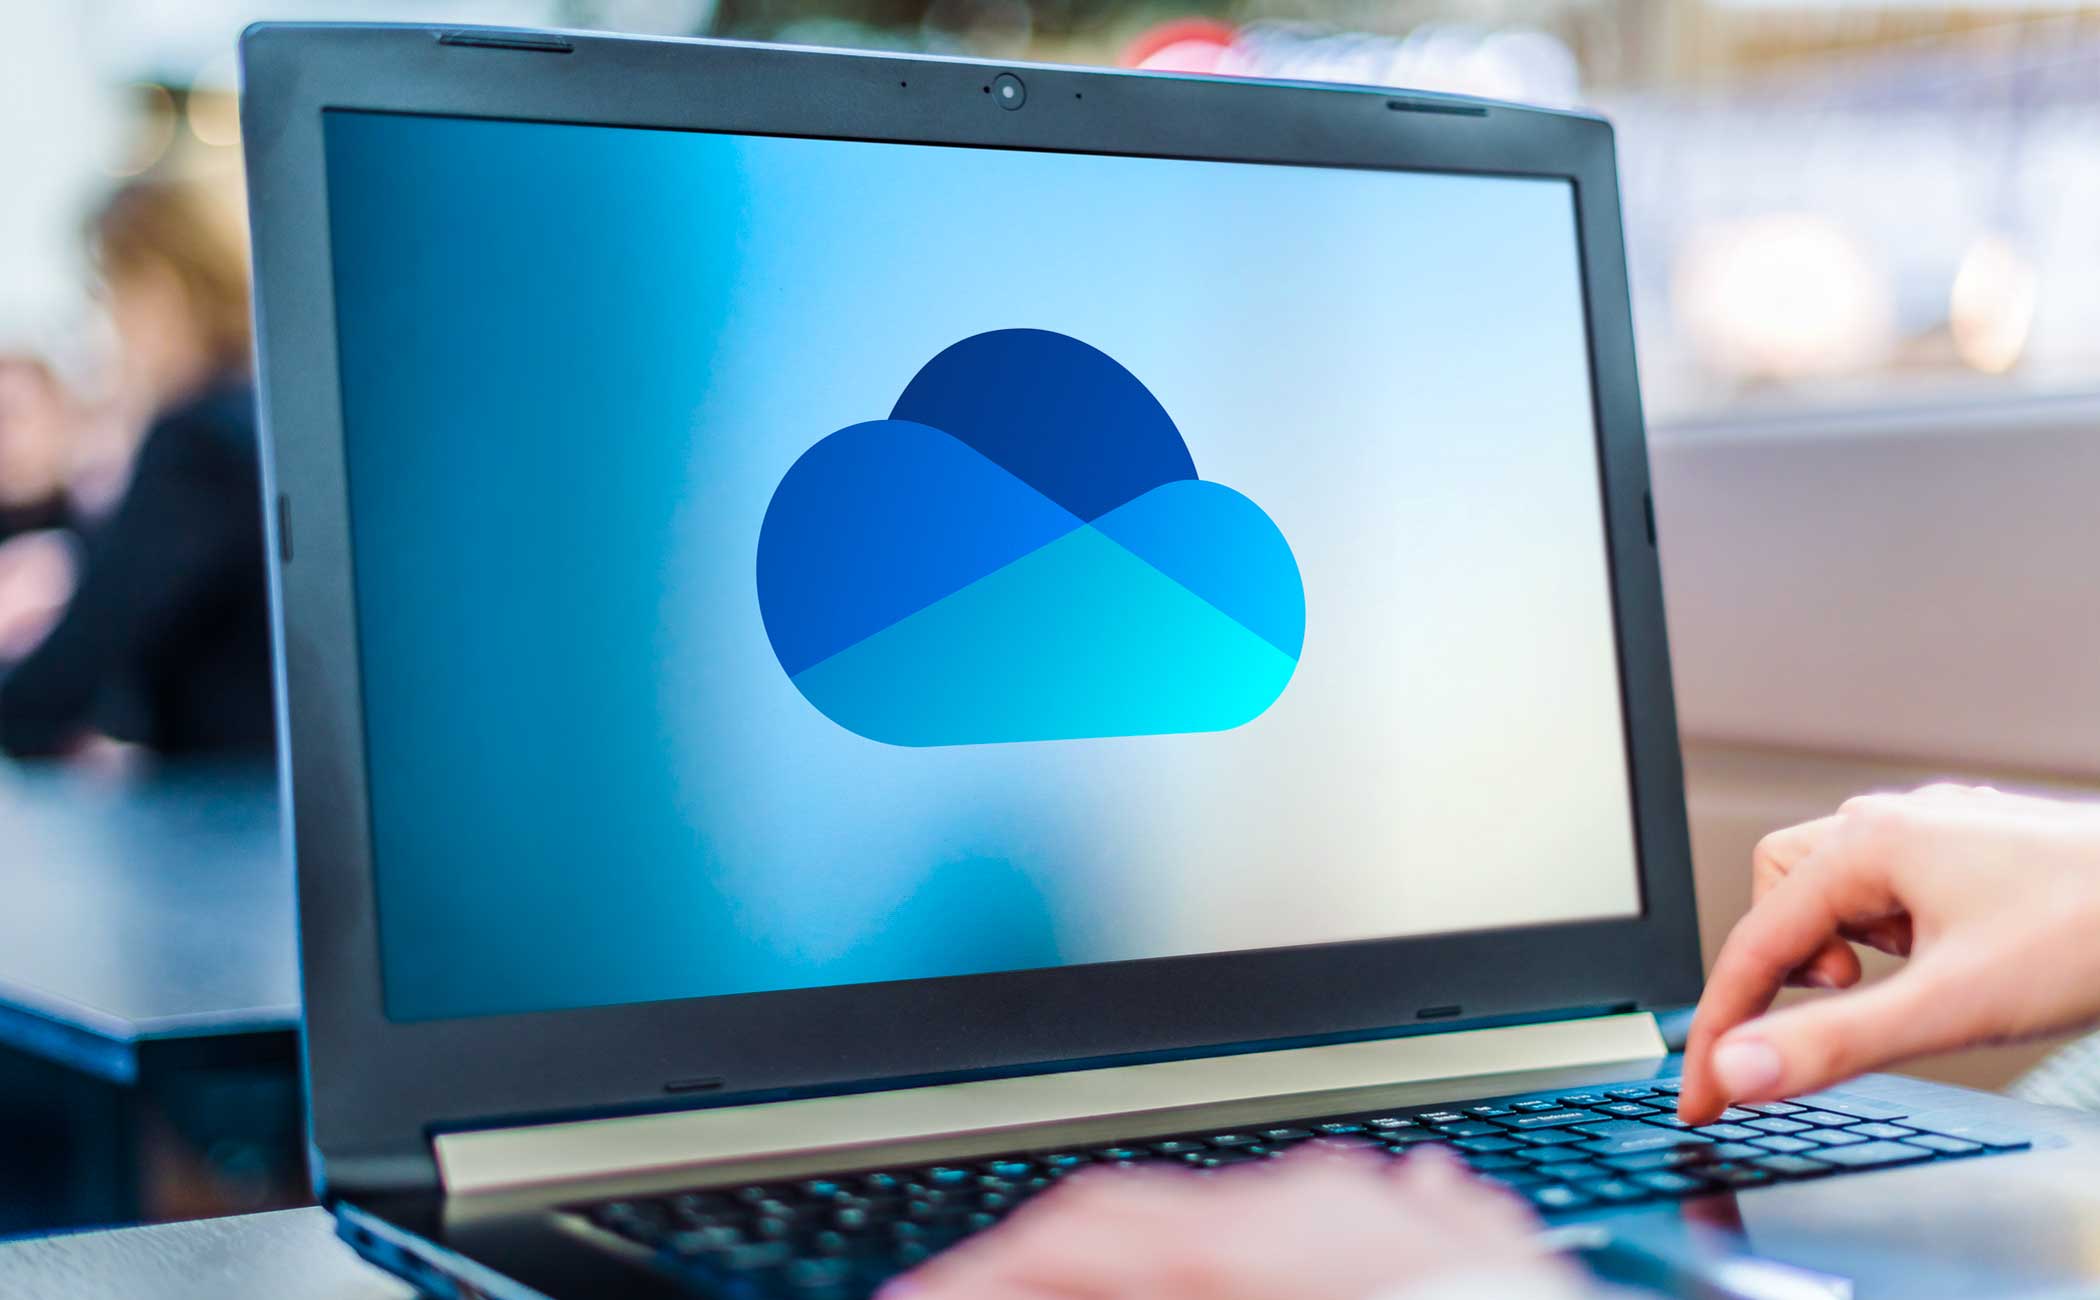 Laptop sitting on a table. The screen depicts a blue cloud graphic. 